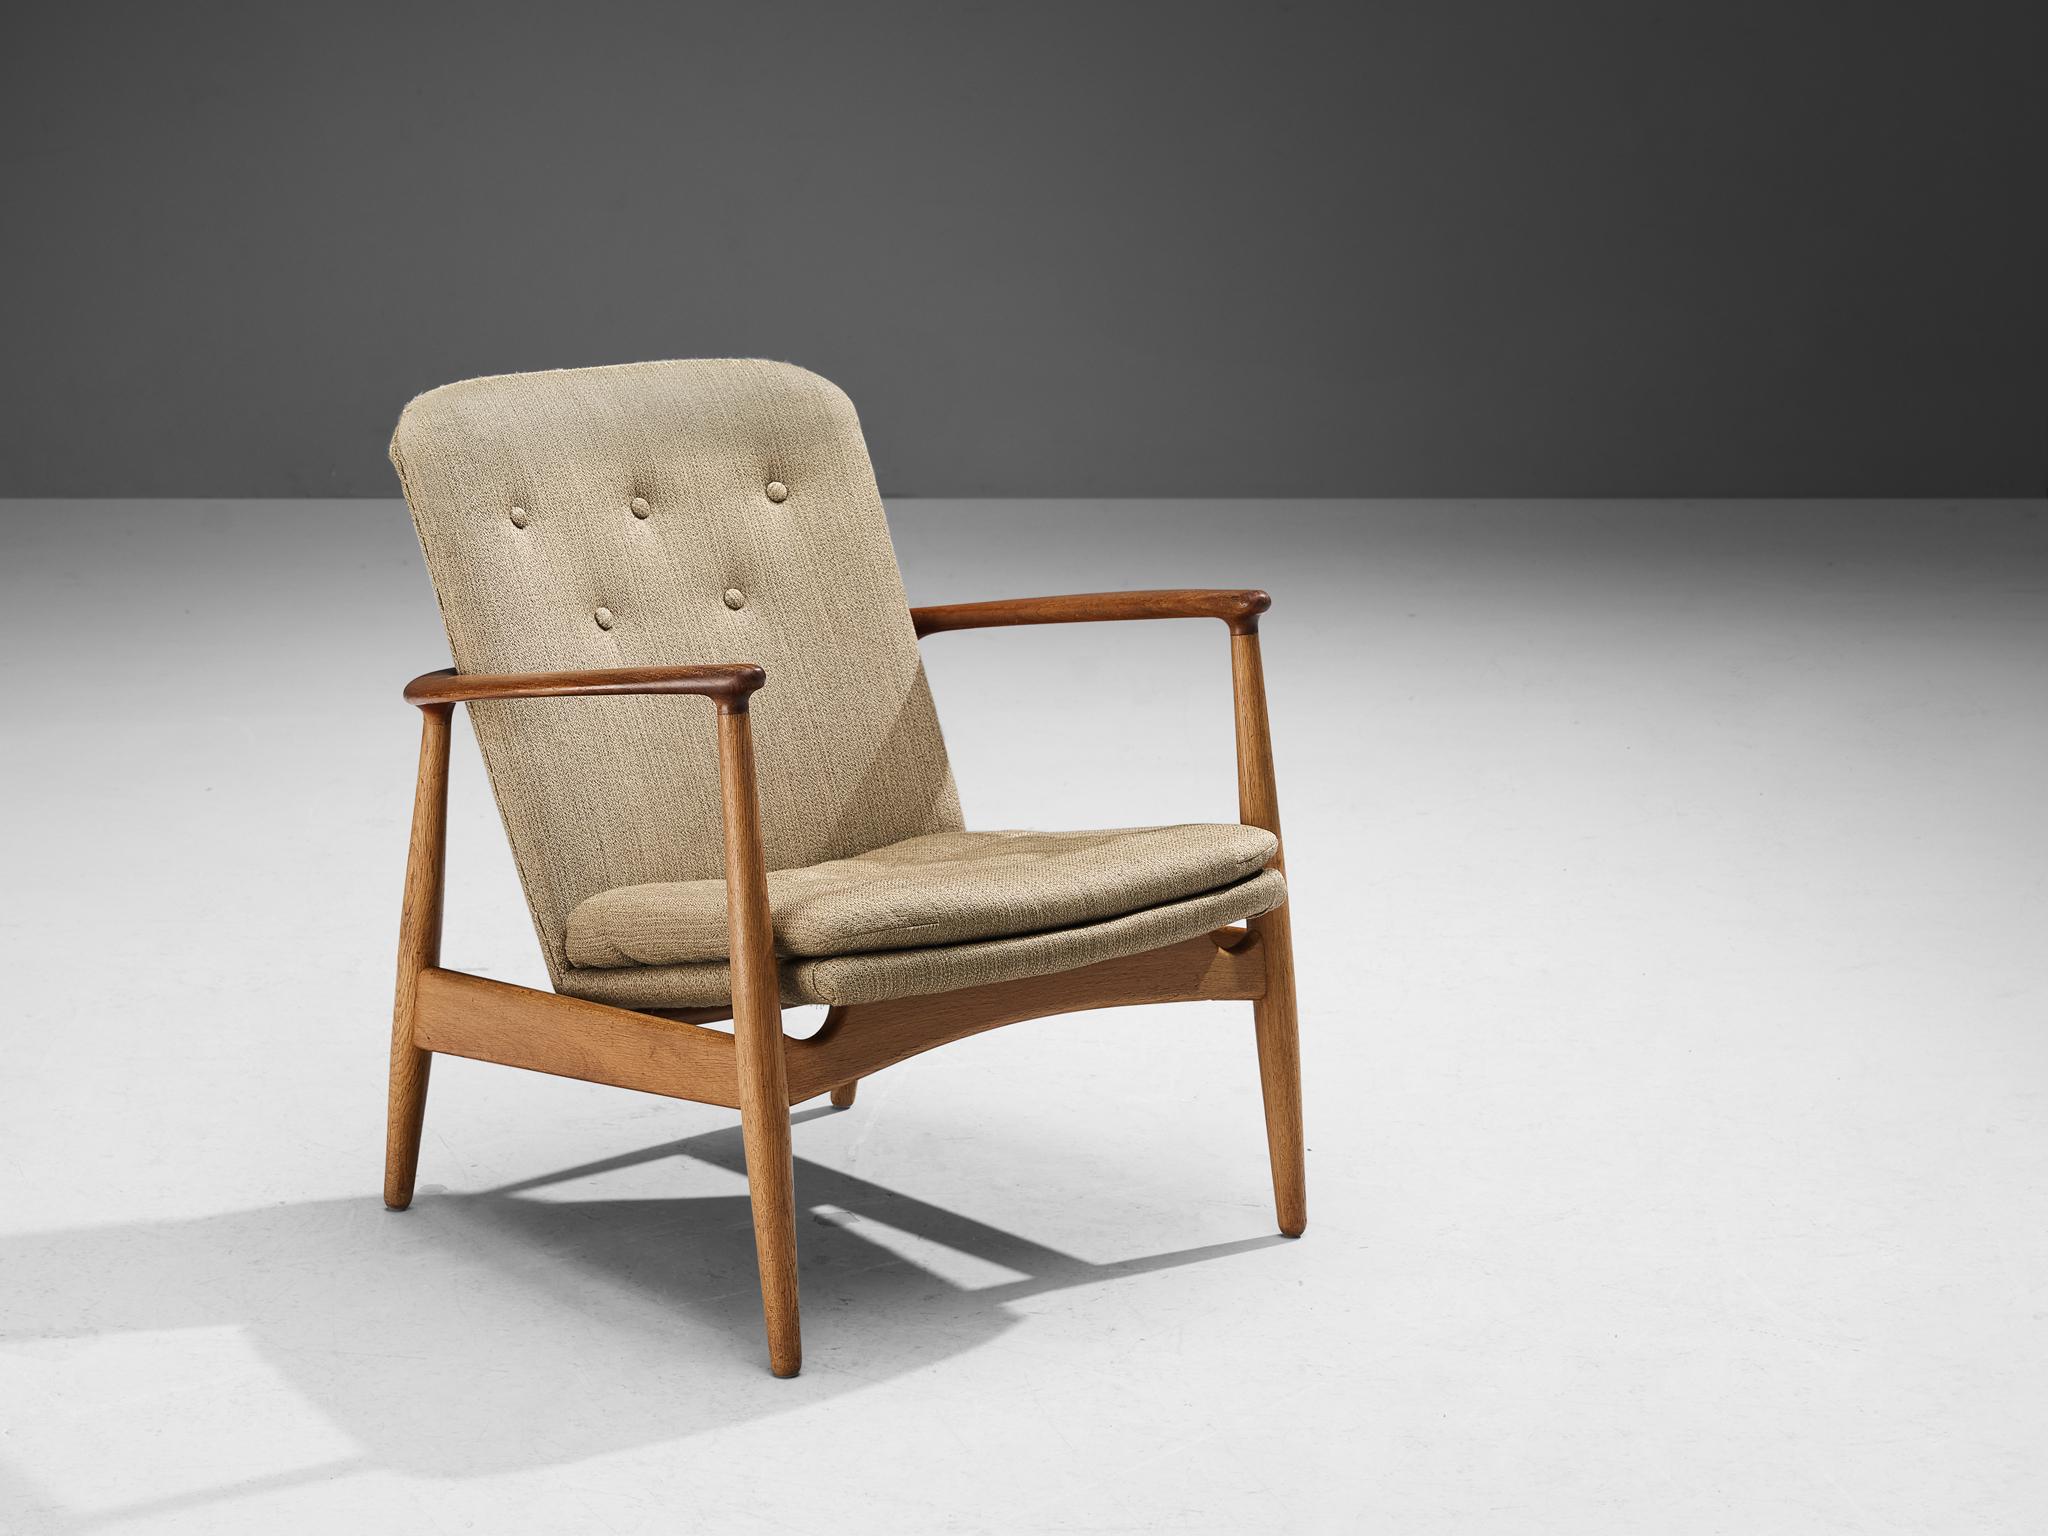 Arne Vodder for Bovirke, lounge chair, model 'BO 90', Denmark, 1952

This easy chair is defined by its thick, wide armrests that run all the way behind the back, beautifully surrounding the backrest in an organic manner. The constructive carved